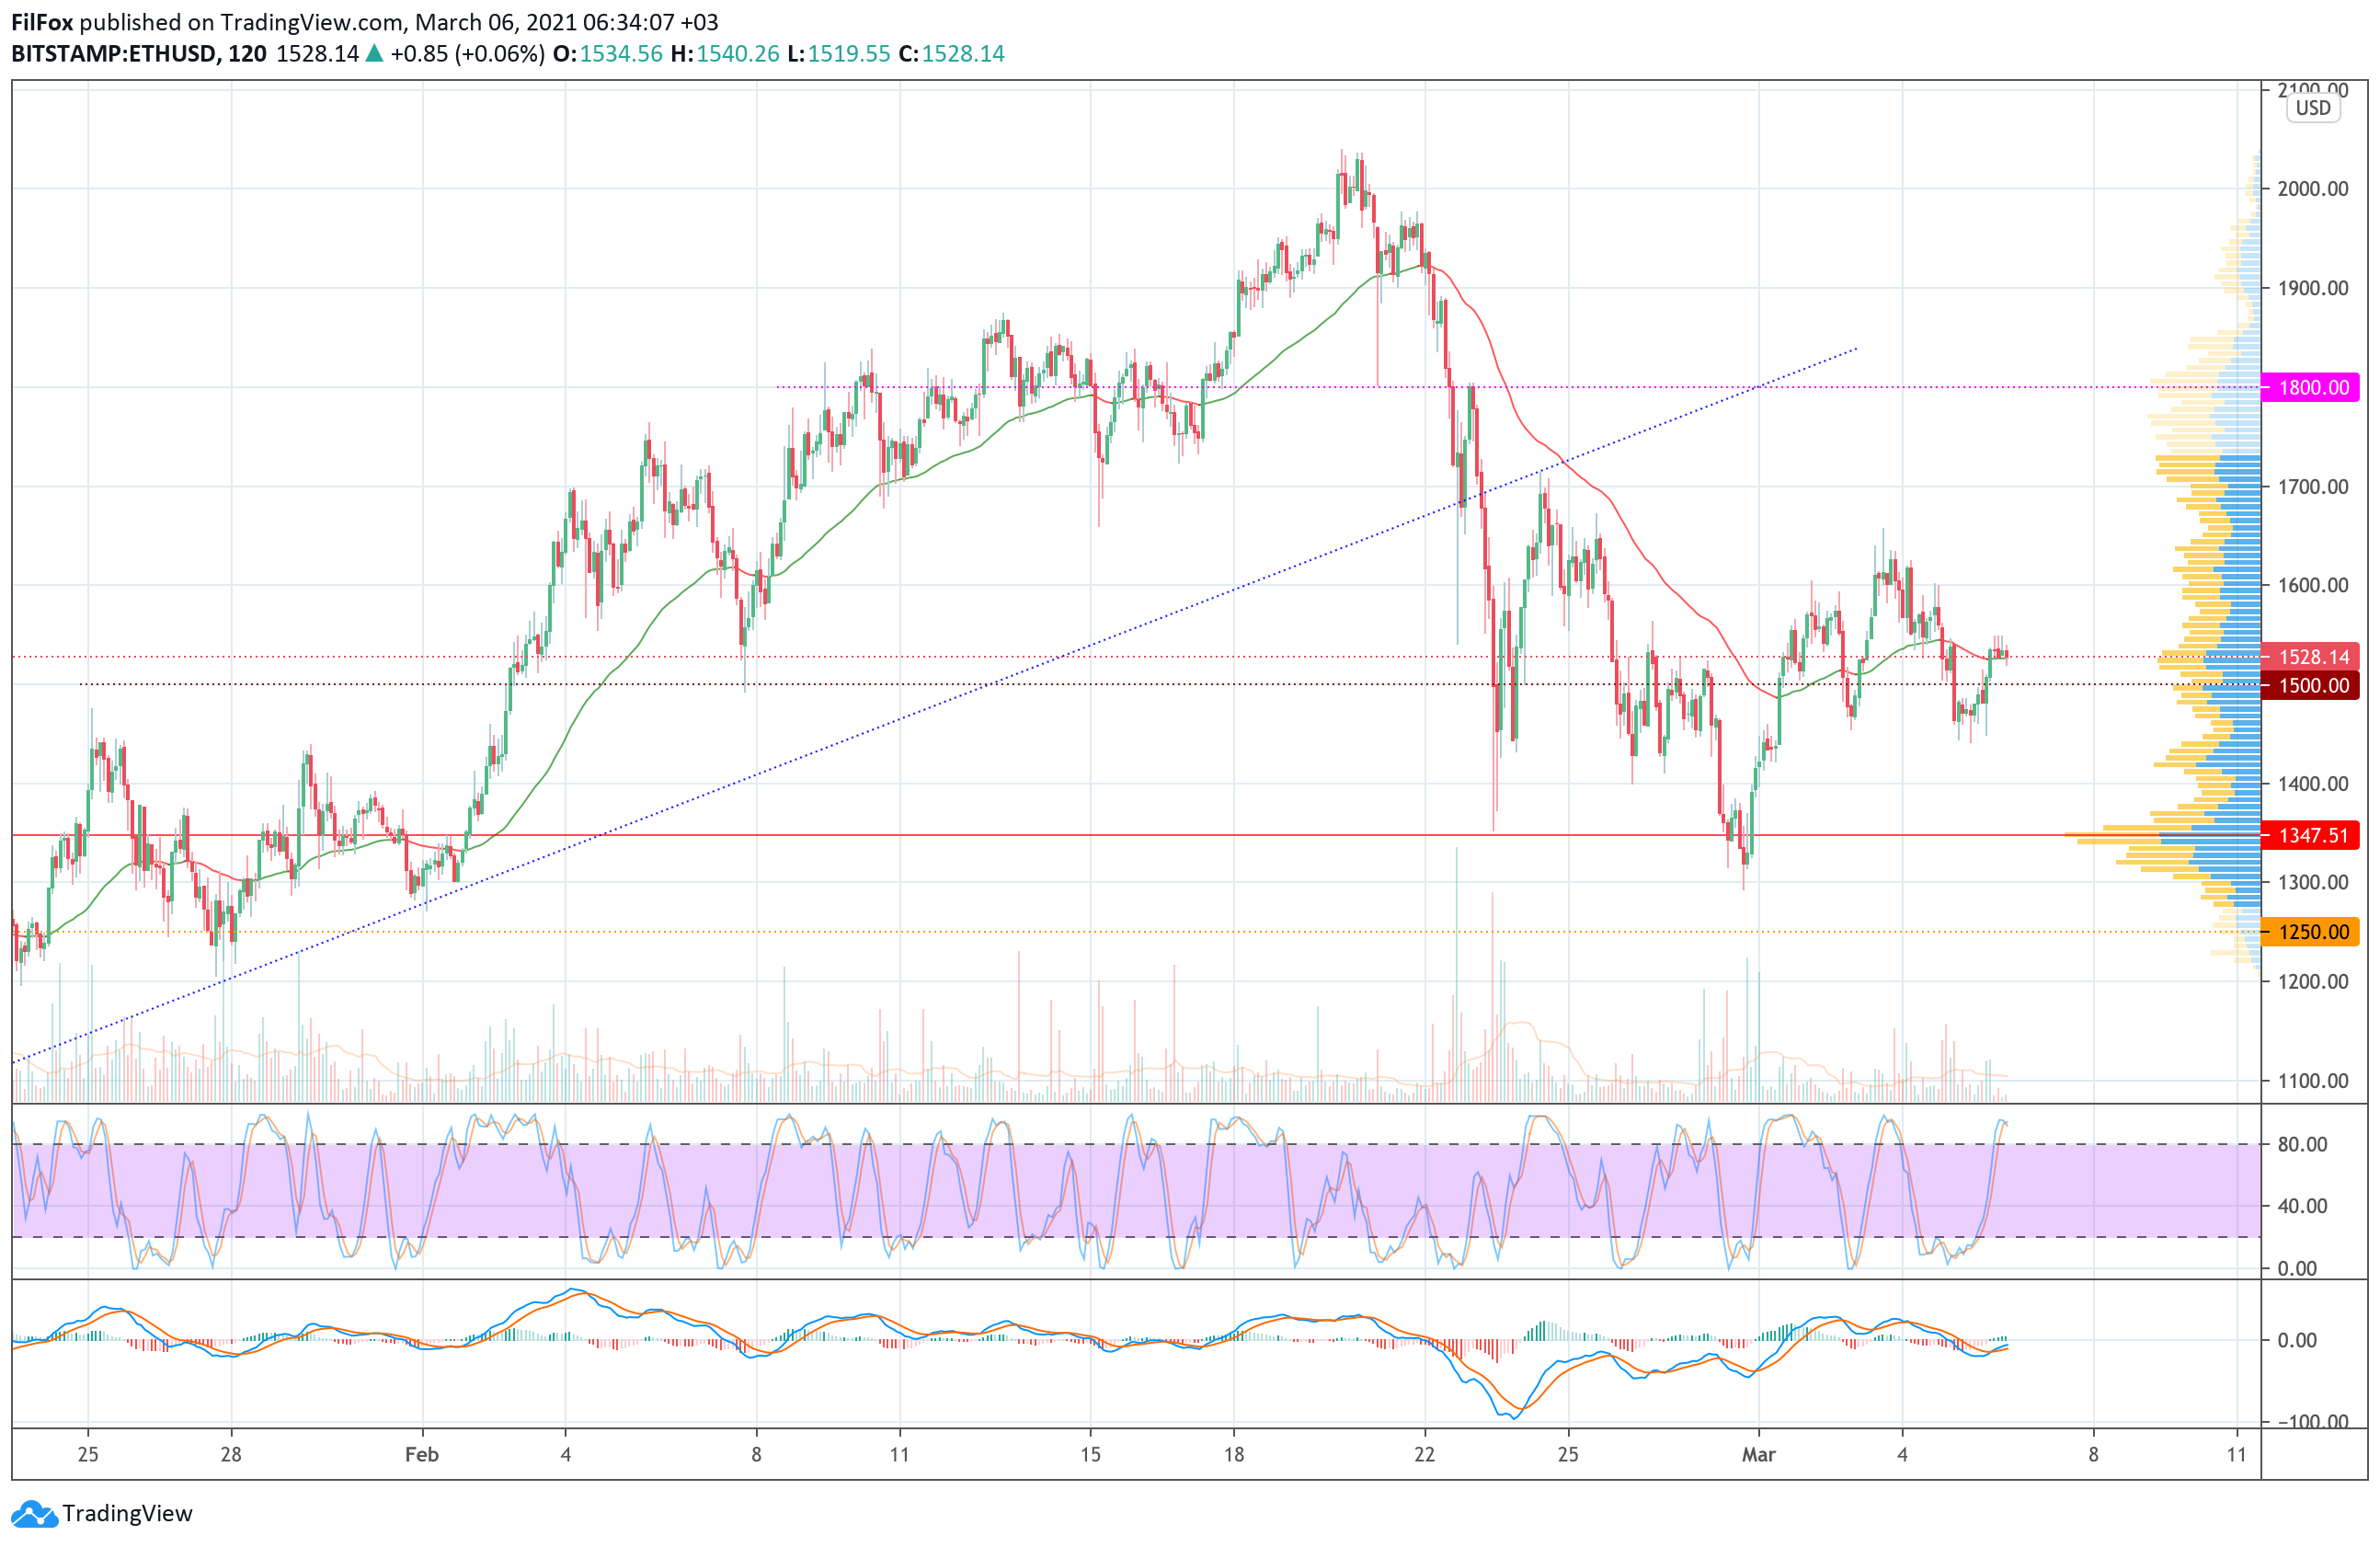 Analysis of the prices of Bitcoin, Ethereum, XRP for 03/06/2021